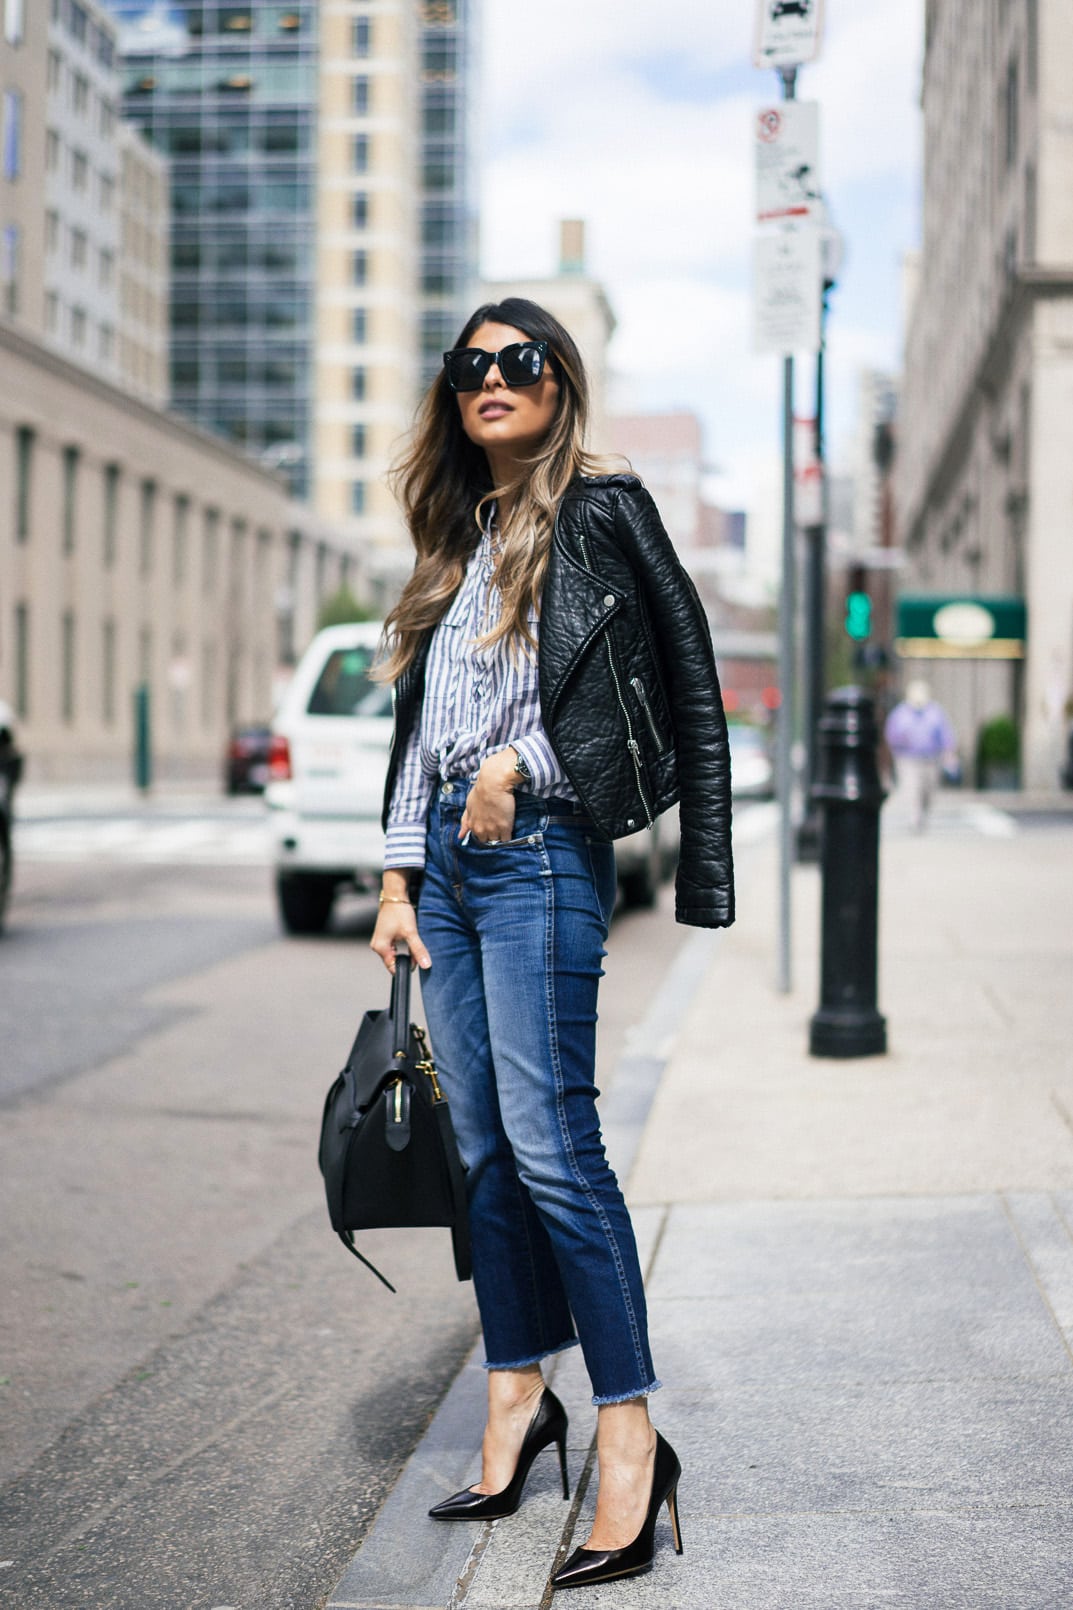 7fam ankle skinny jeans, black pumps, leather jacket, lace-up shirt, back to basics, casual look